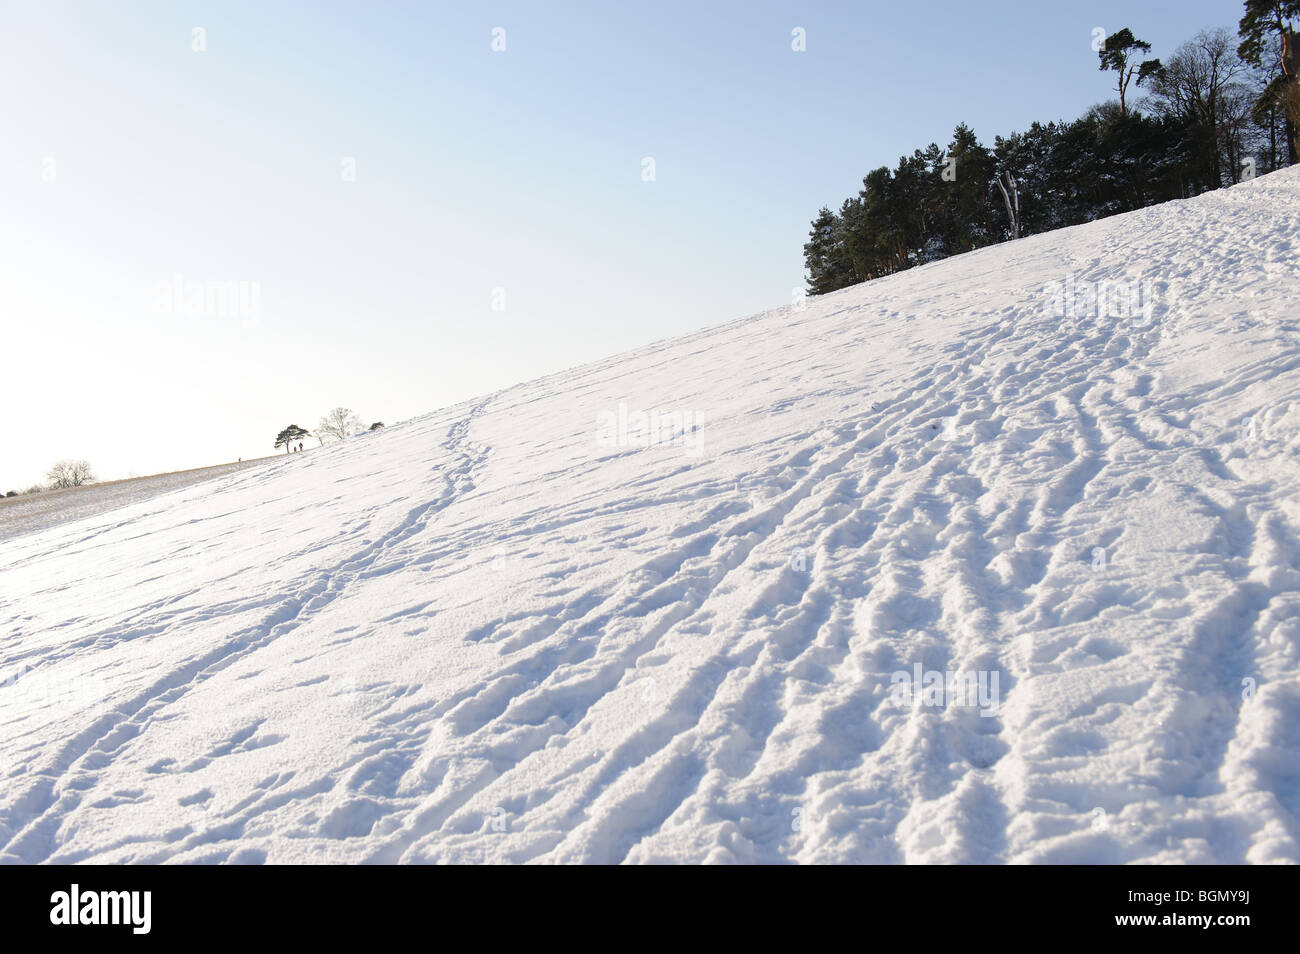 Snow landscape scenic field winter Christmas hill white ice cold blue sky trees hedgerow footprints sledge sledging Stock Photo